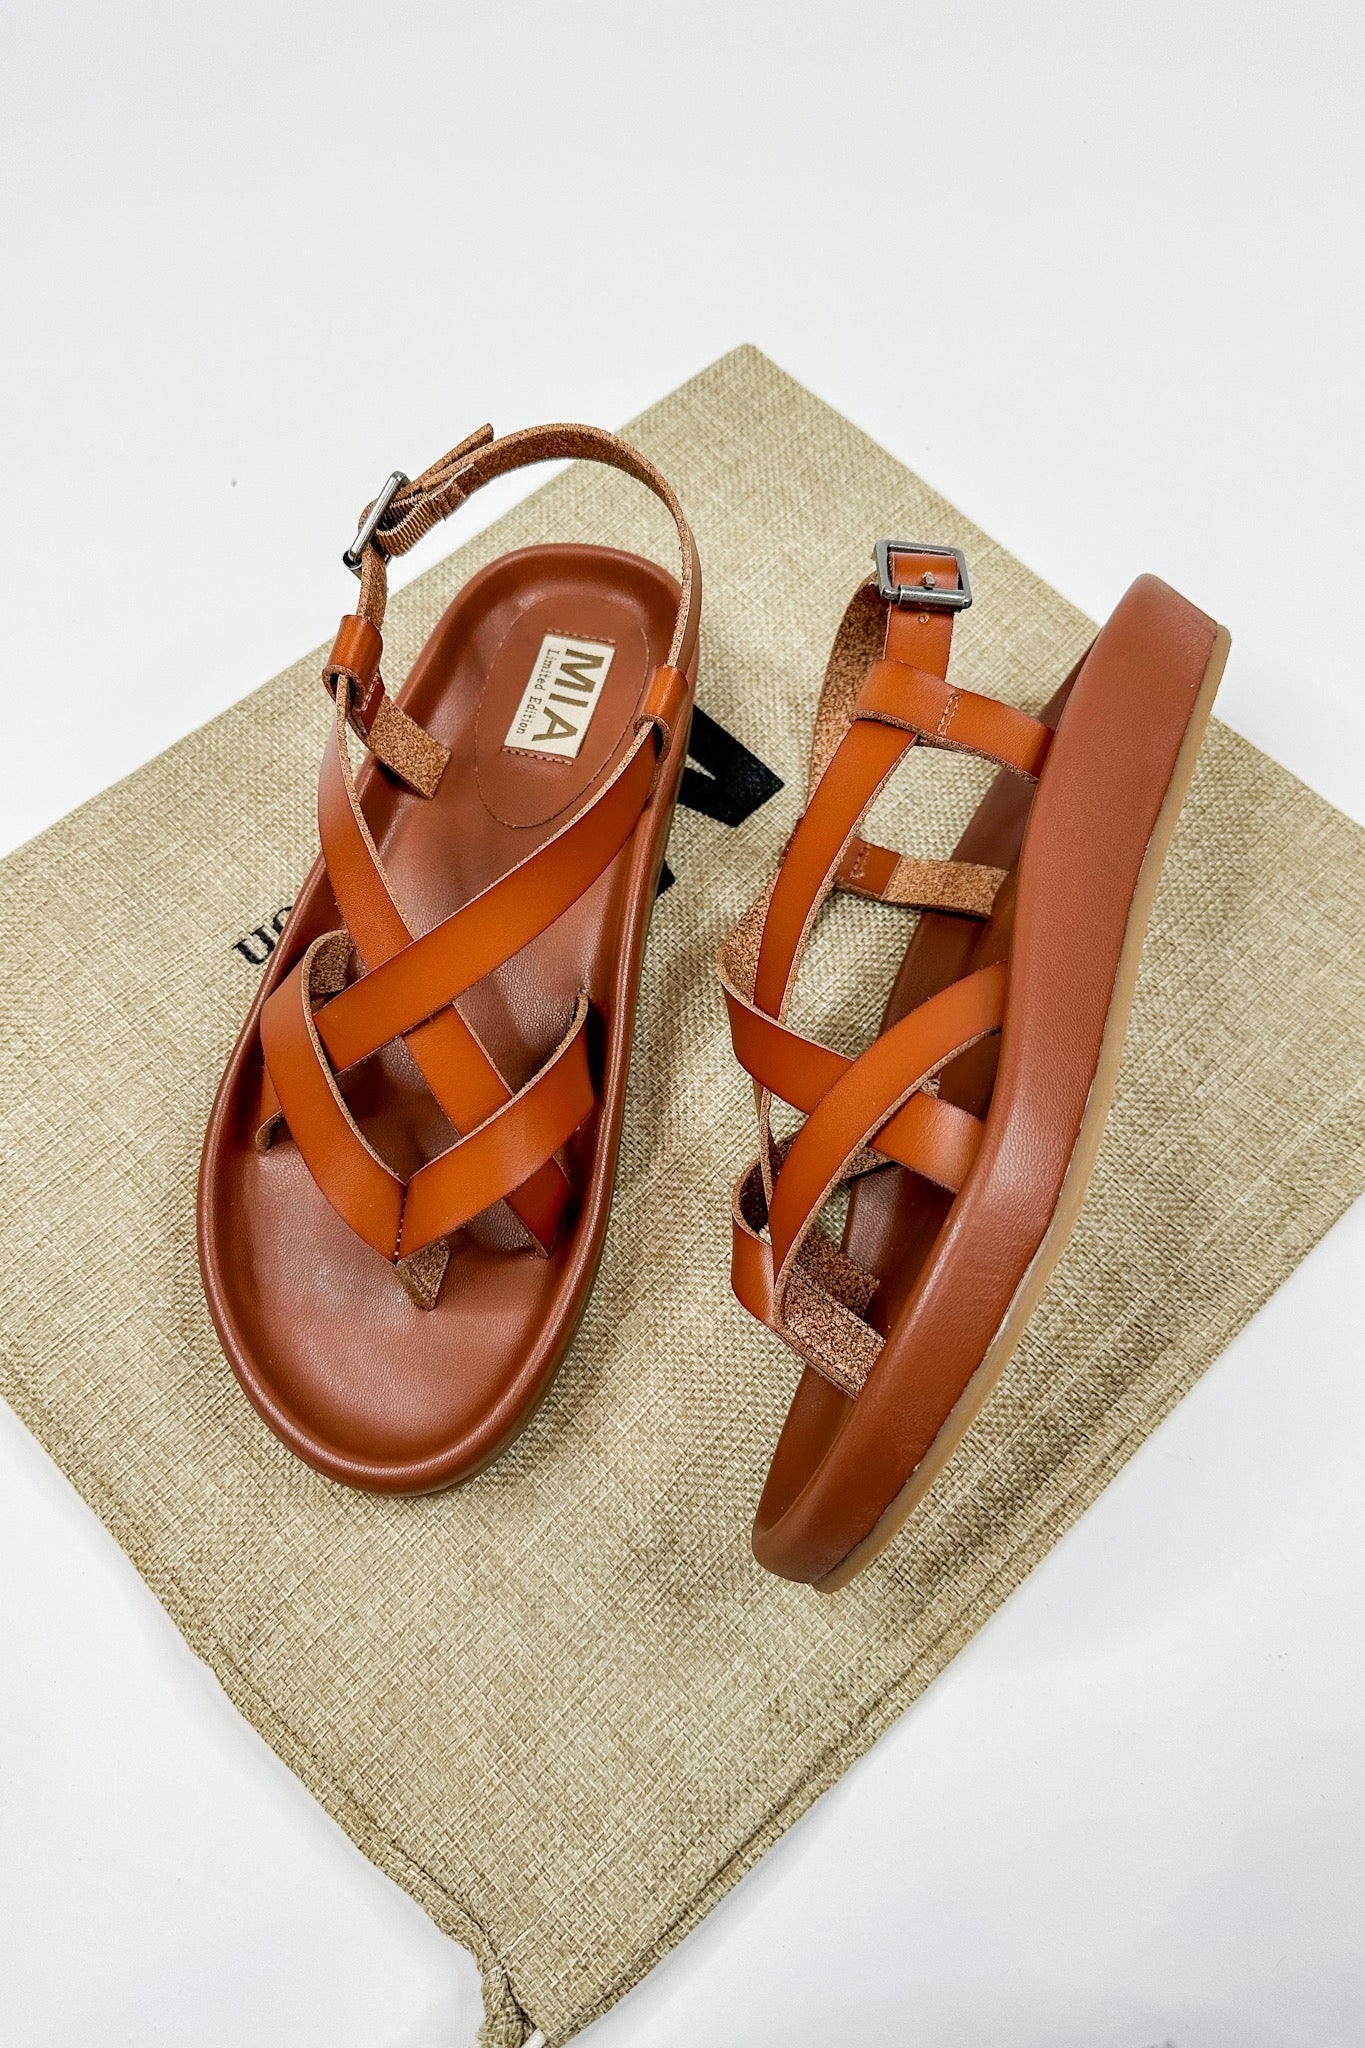 Natural Leather Criss Cross Sandal